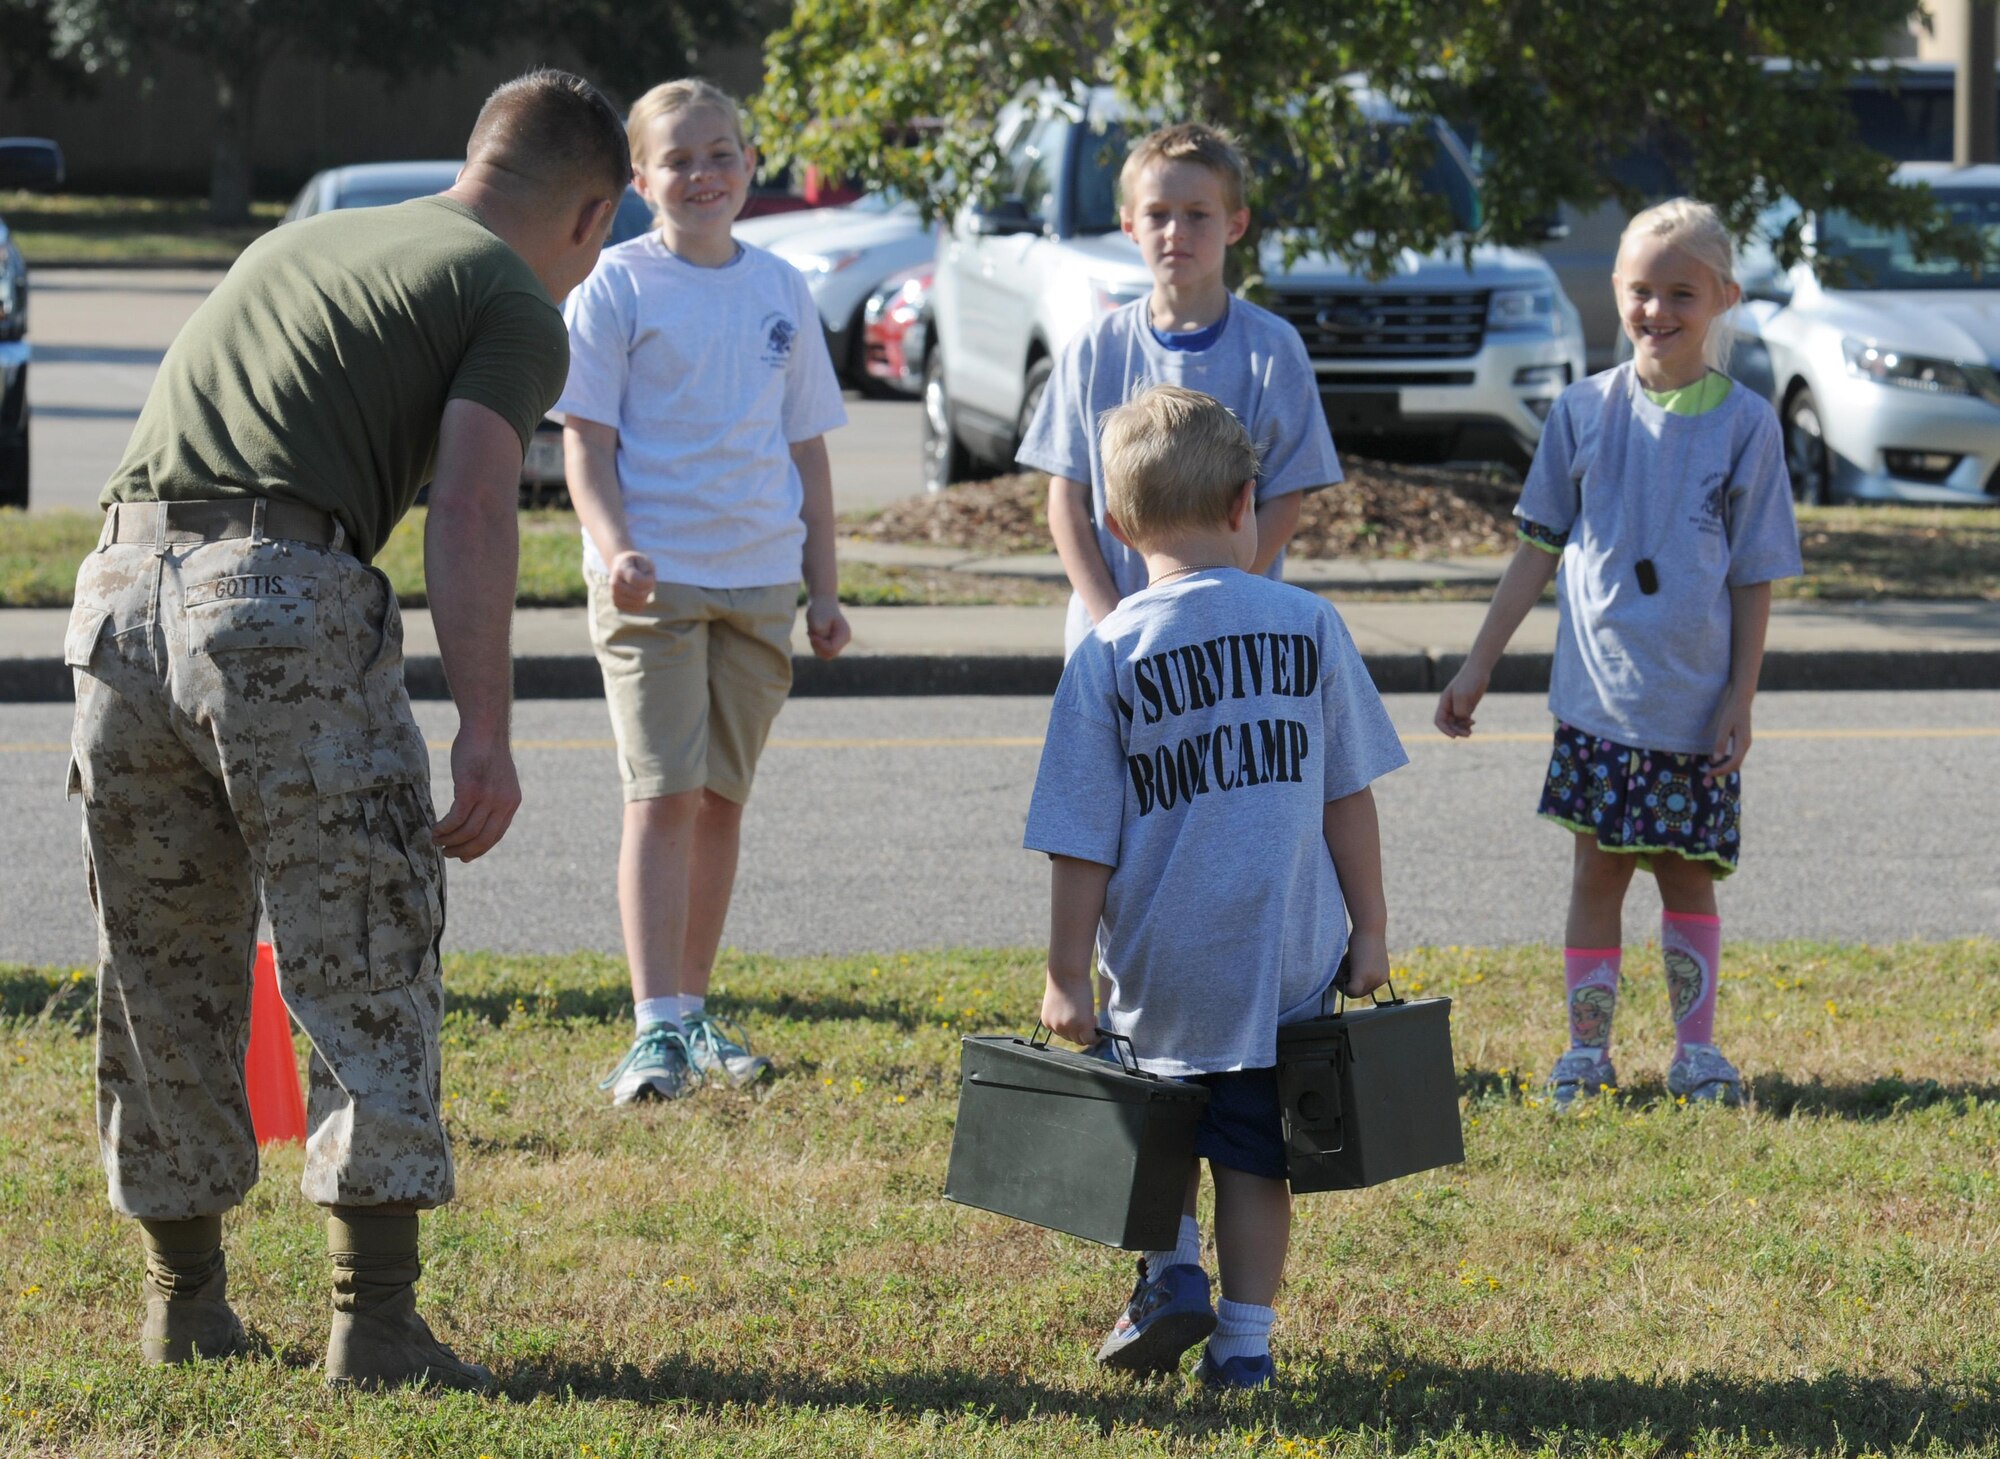 U.S. Marine Pfc. Jonathan Gottis, Keesler Marine Detachment student, assists Jackson Hedin, son of Maj. Cory Hedin, 81st Diagnostic and Therapeutics Squadron pharmacist, with completing a combat fitness test during Operation Hero Oct. 15, 2016, on Keesler Air Force Base, Miss. The event was designed to help children better understand what their parents do when they deploy. (U.S. Air Force photo by Kemberly Groue/Released)